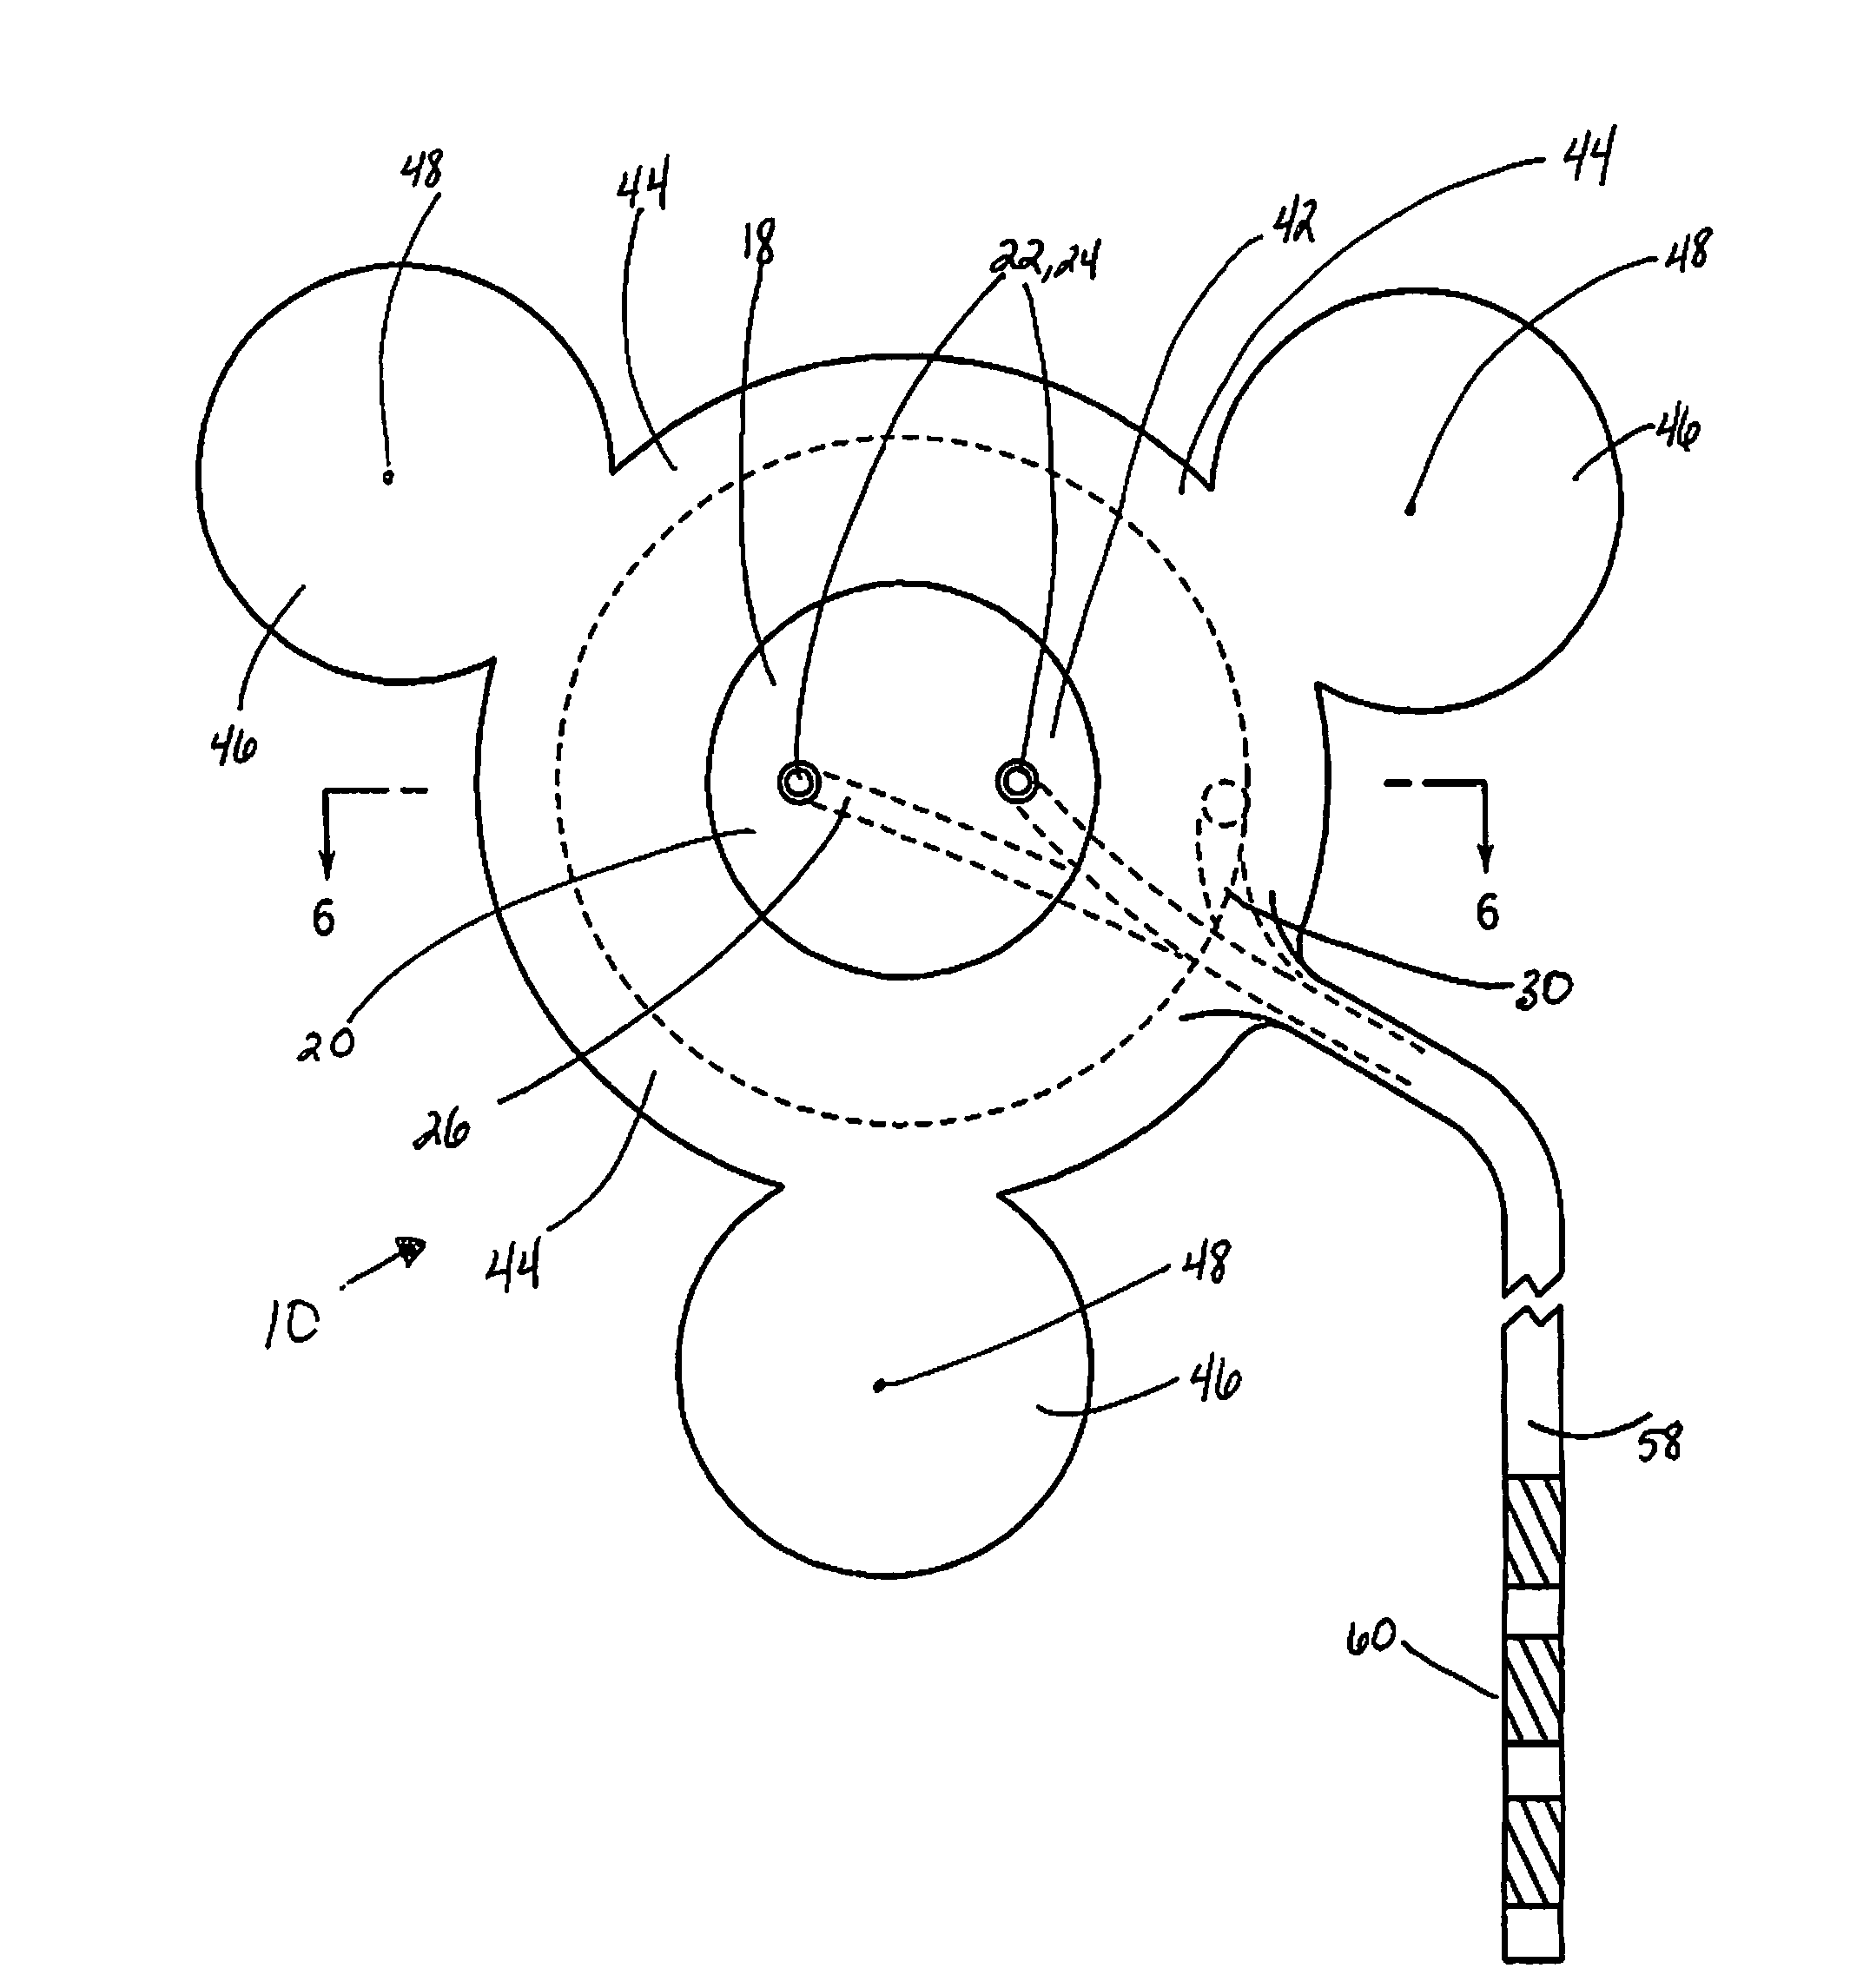 Intracranial sensing & monitoring device with macro and micro electrodes